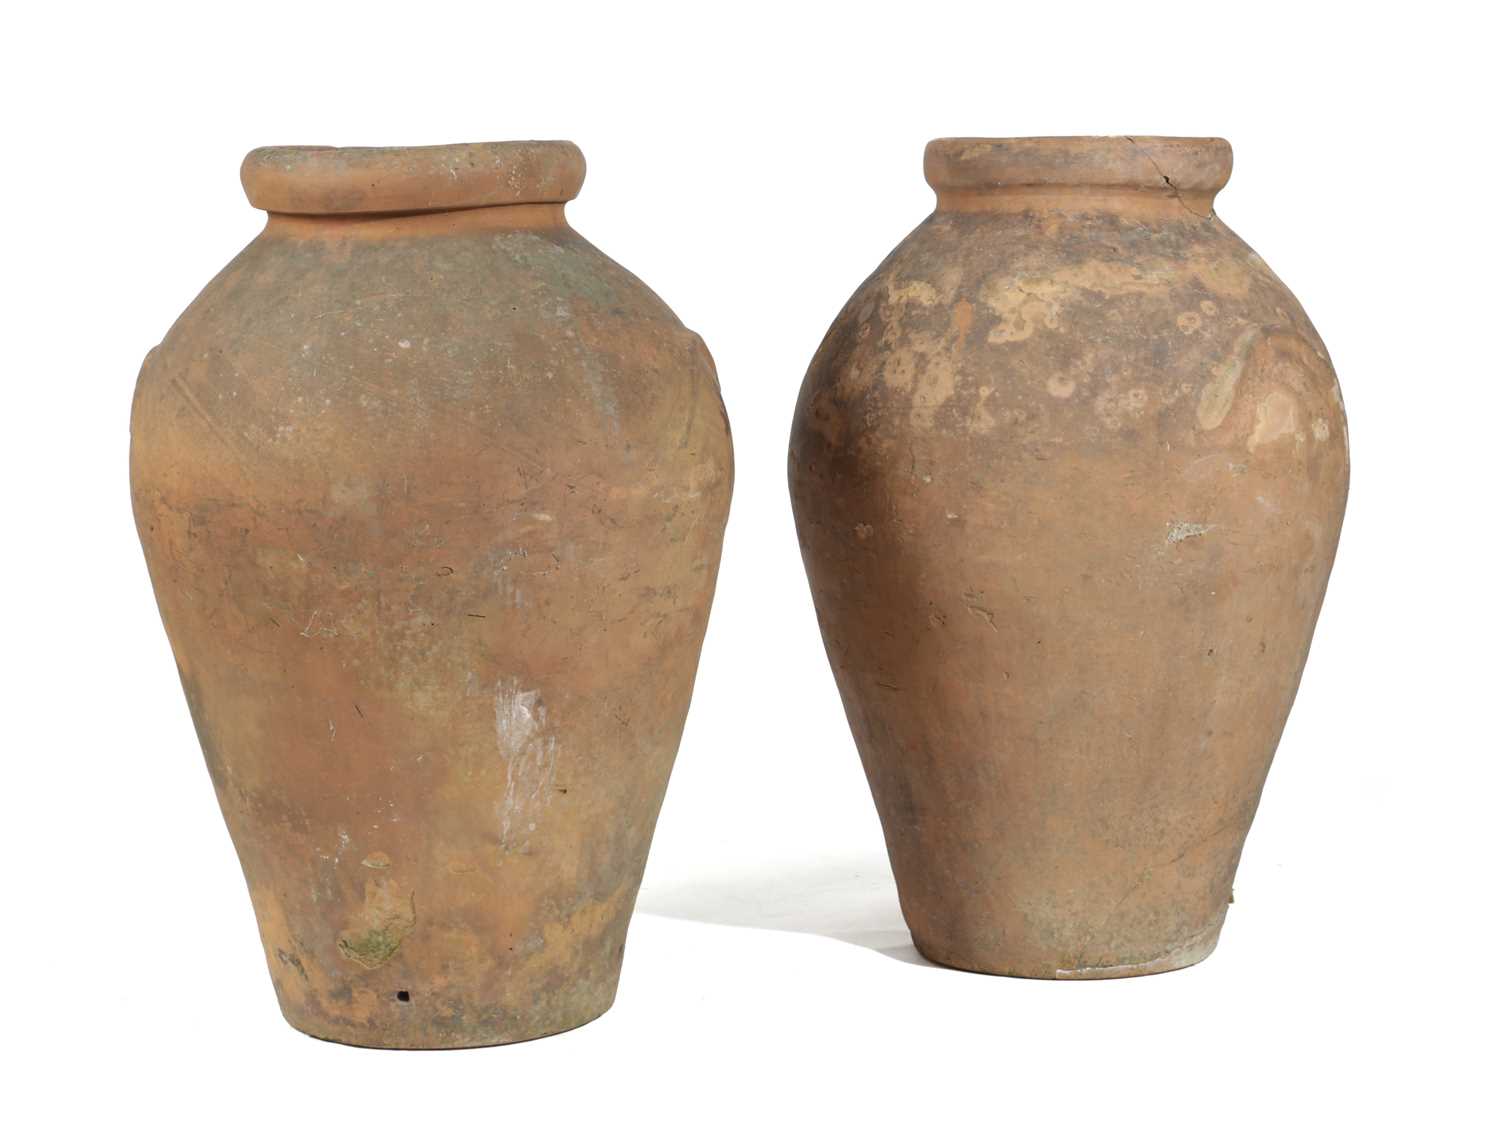 A PAIR OF ITALIAN TERRACOTTA OIL JARS VINCENZO BITOSSI, MONTELUPO, LATE 19TH / EARLY 20TH CENTURY of